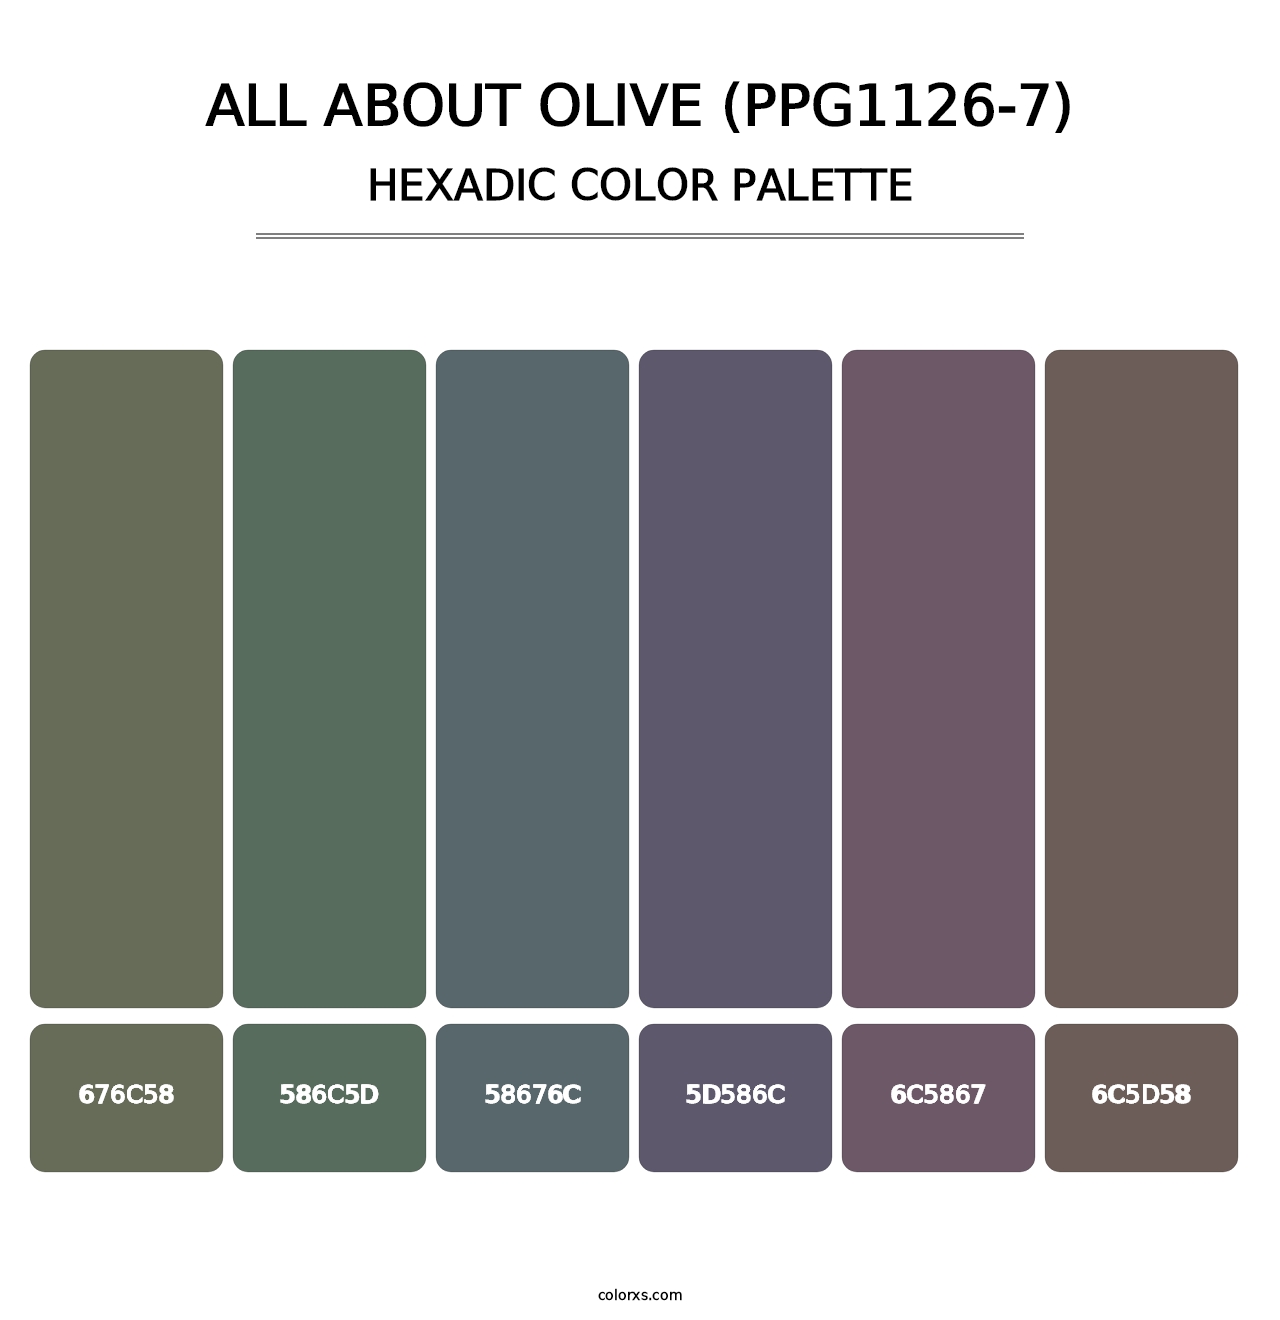 All About Olive (PPG1126-7) - Hexadic Color Palette